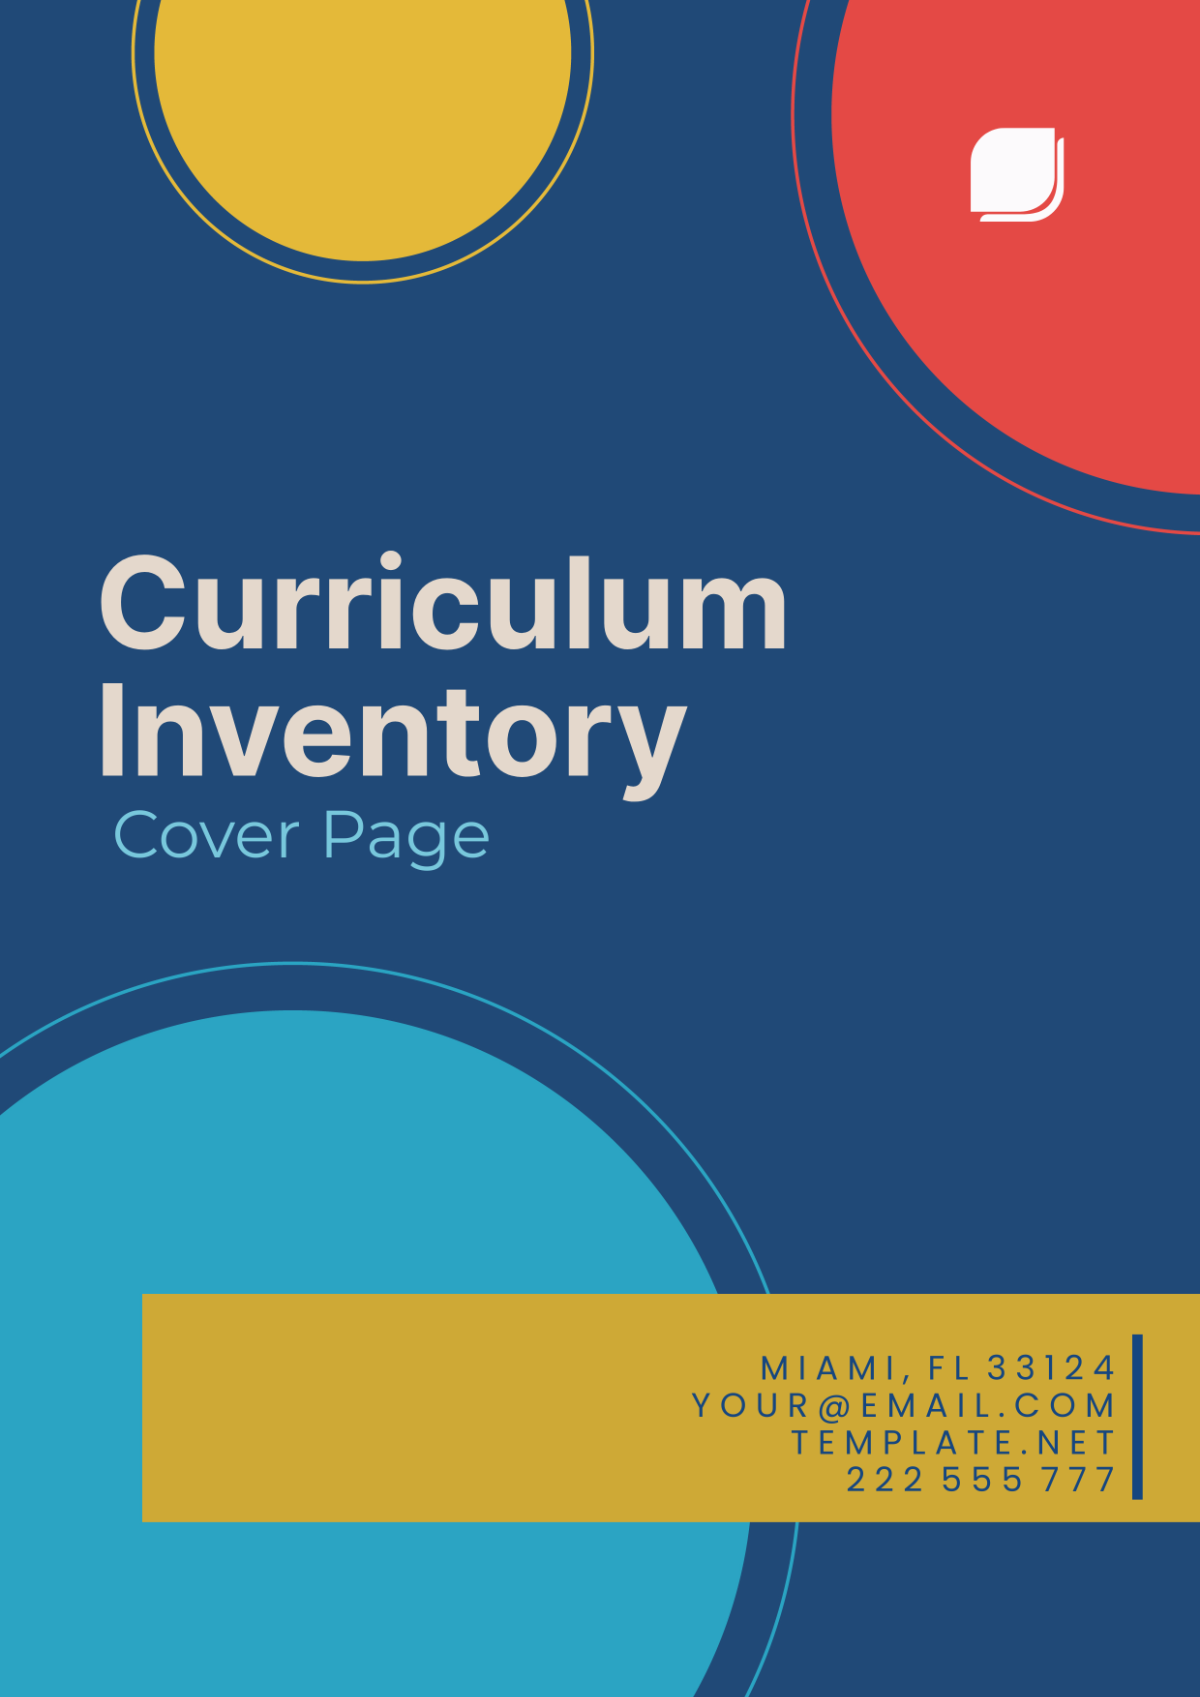 Curriculum Inventory Cover Page